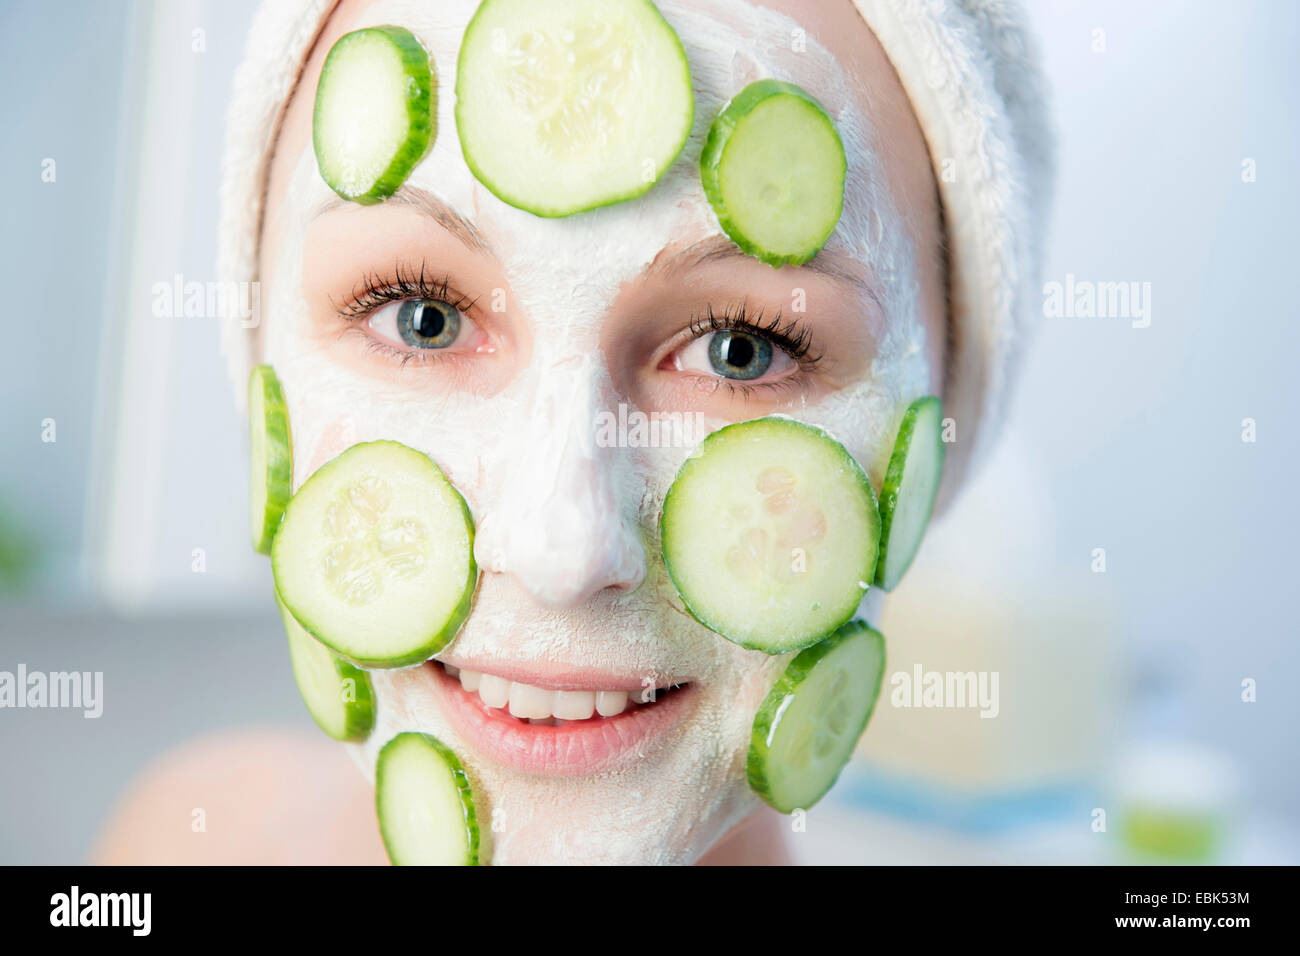 woman with cucumber face masque Stock Photo